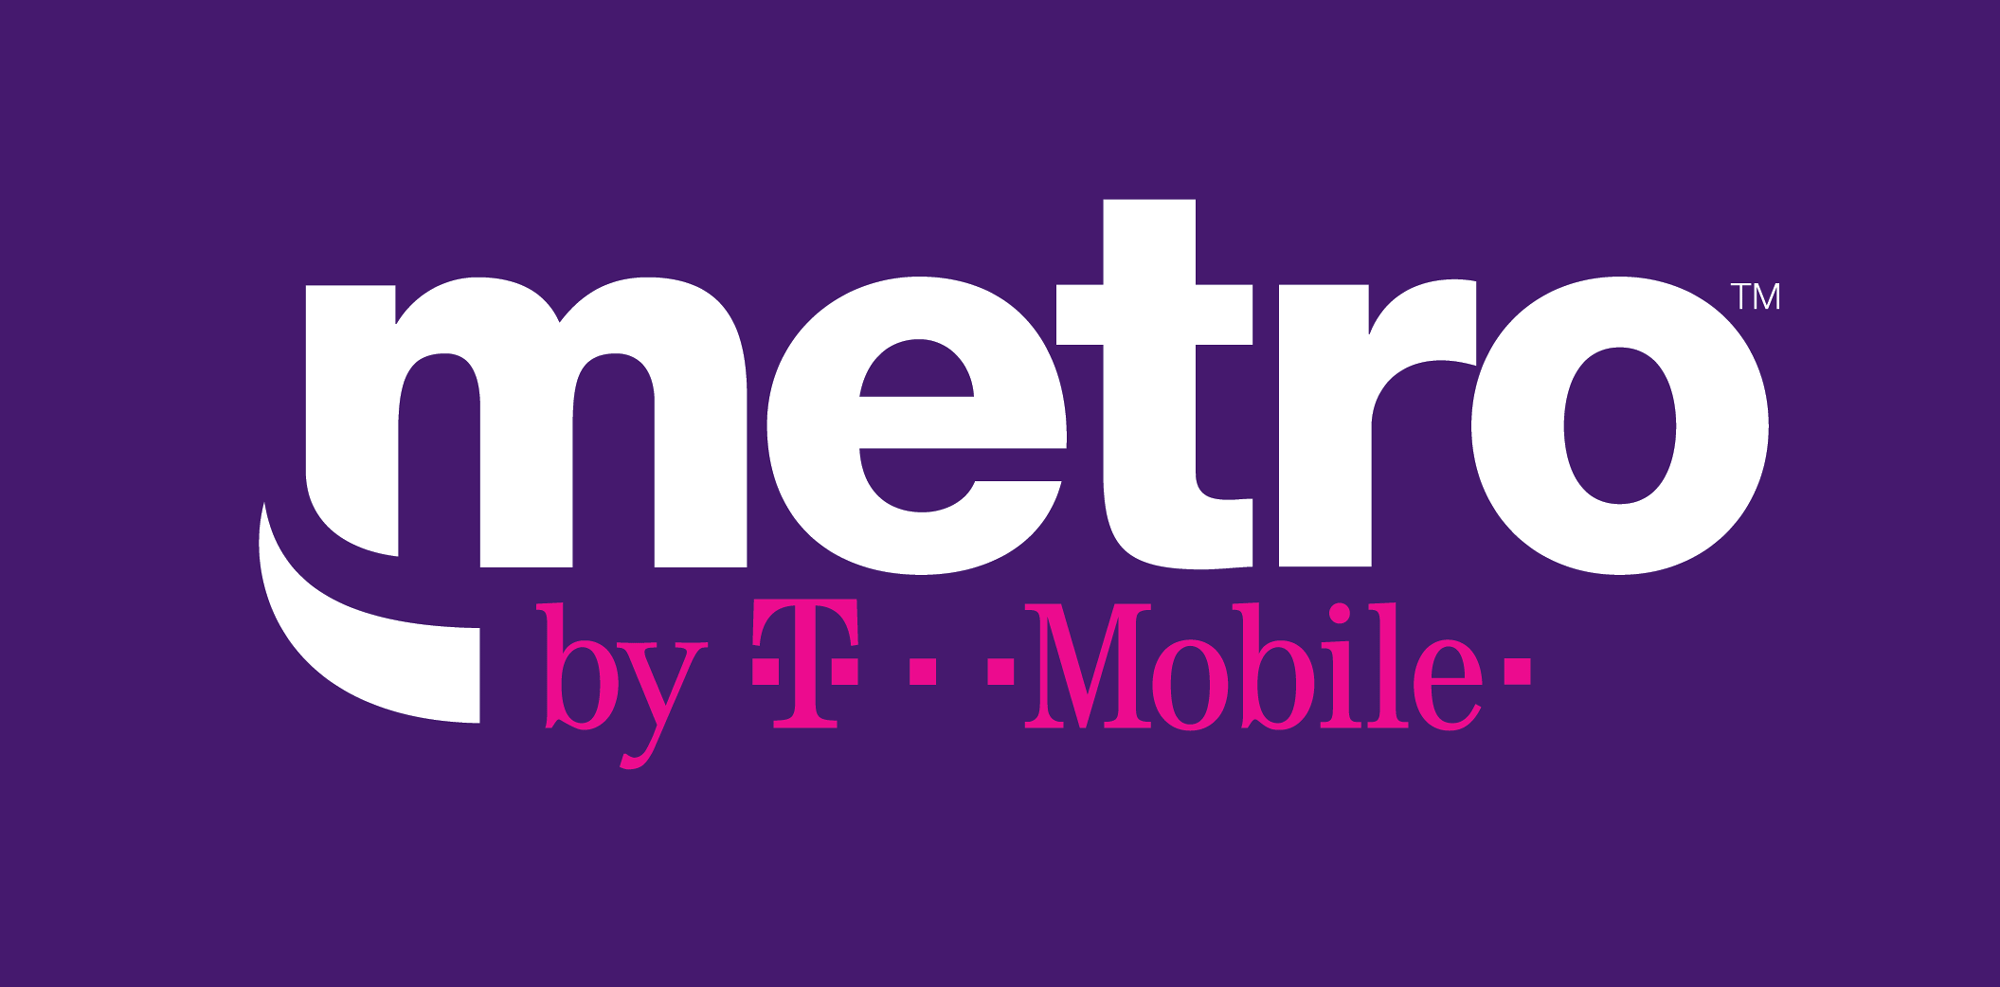 Metro PCS Logo - Brand New: New Name and Logo for Metro by T-Mobile